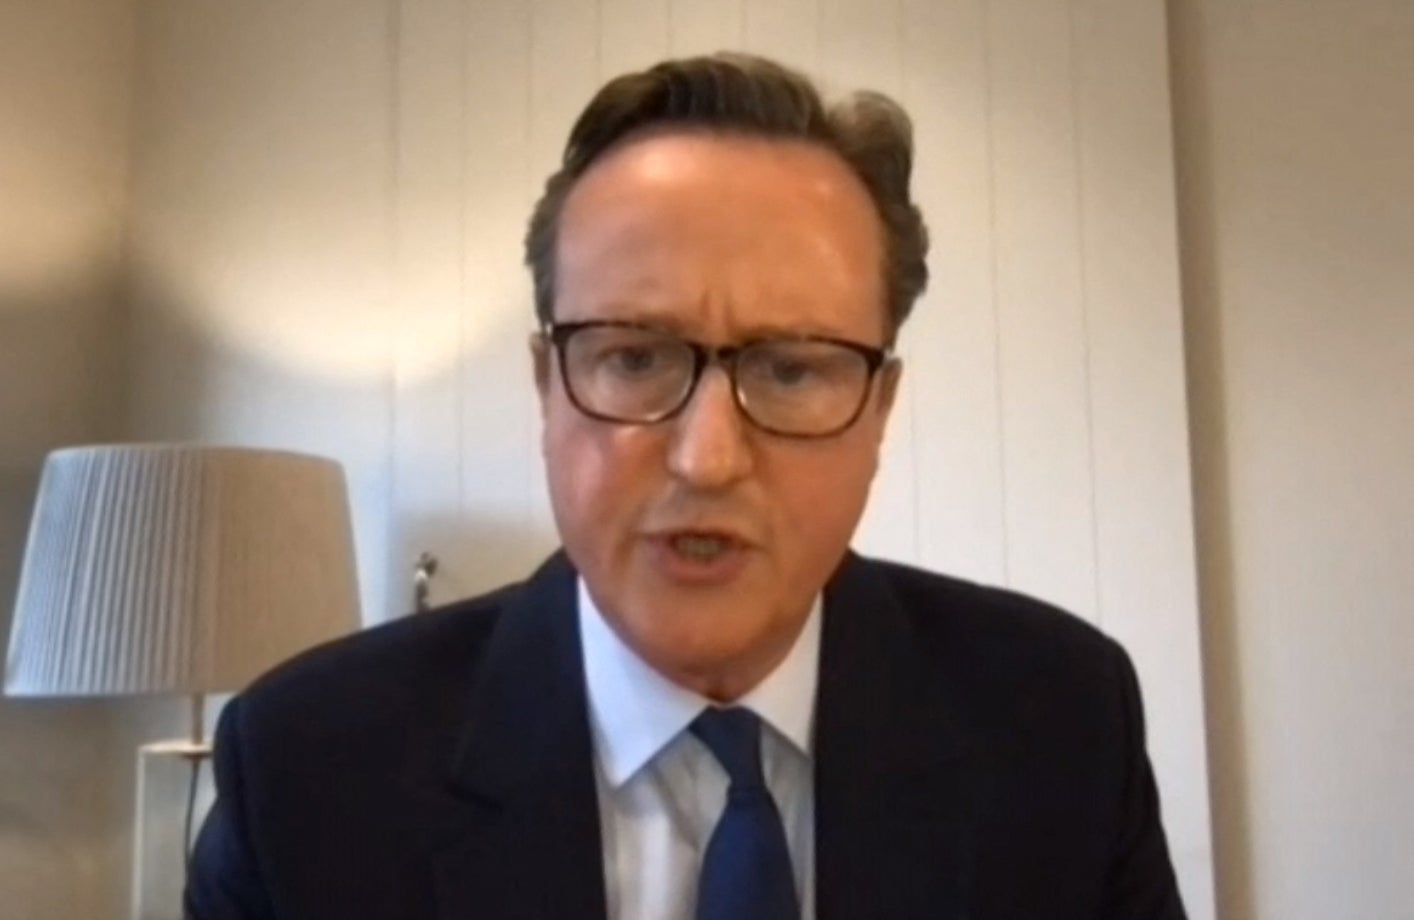 ‘I have sympathy for Cameron’s seeming inability to judge what’s appropriate and what isn’t’